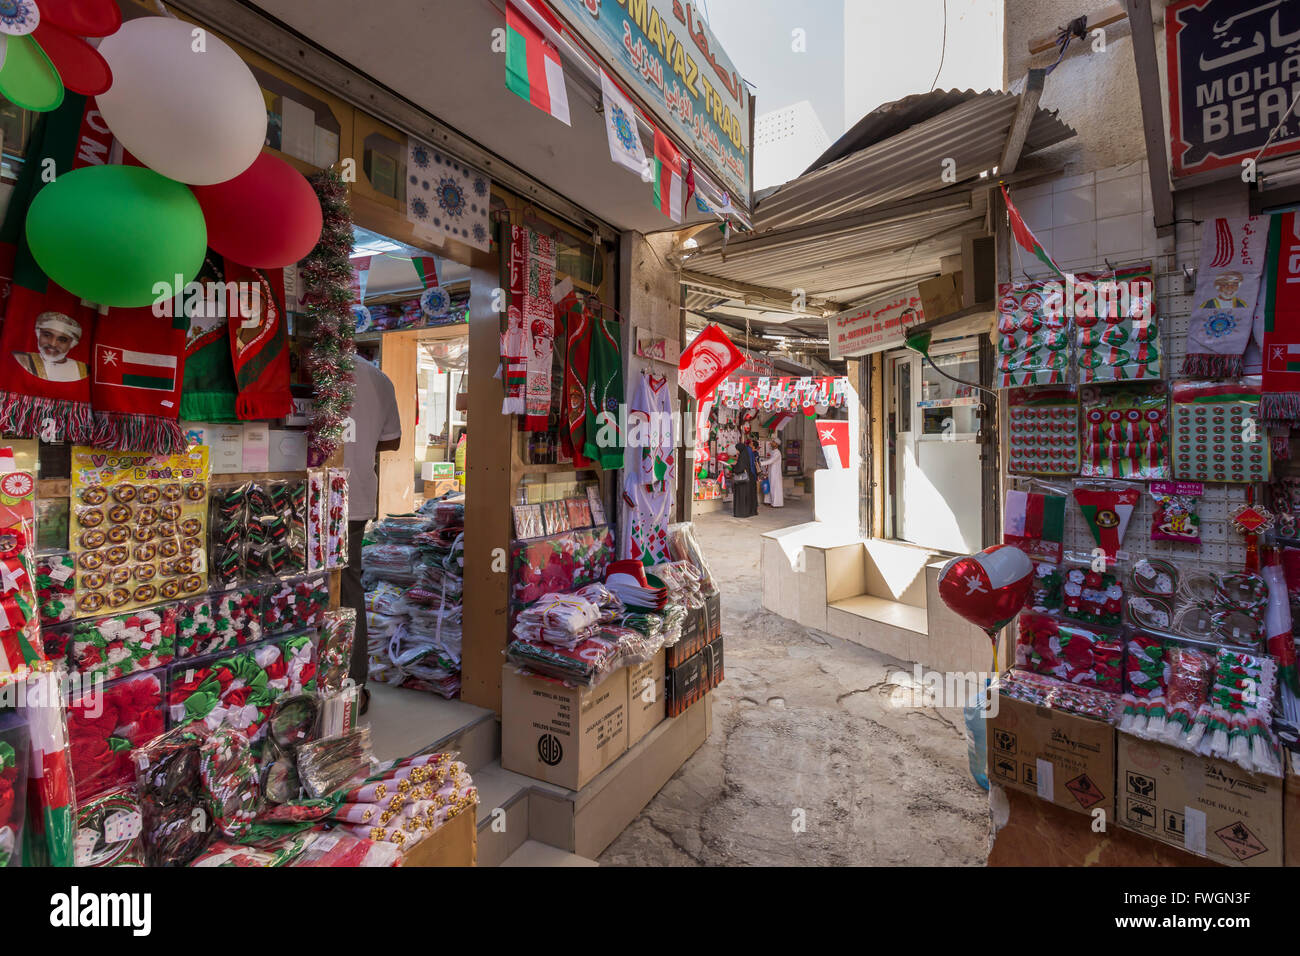 Flags and other Oman National Day decorations for sale at Mutrah Souq, Muscat, Oman, Middle East Stock Photo